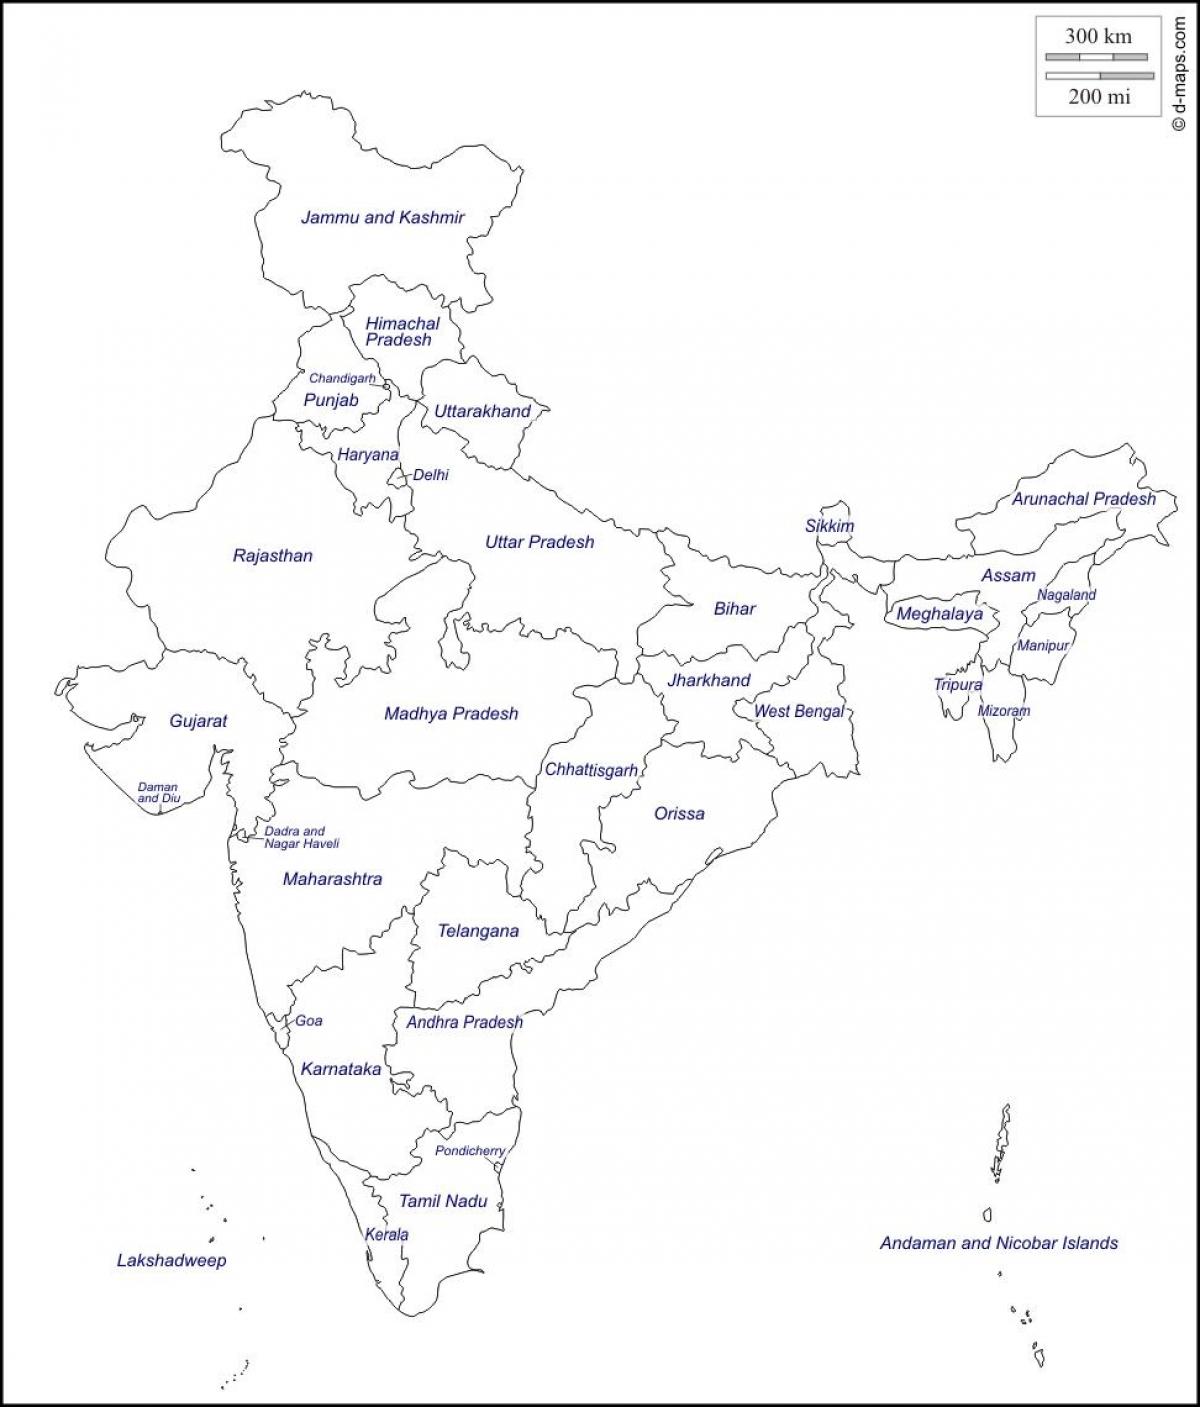 India outline map with states